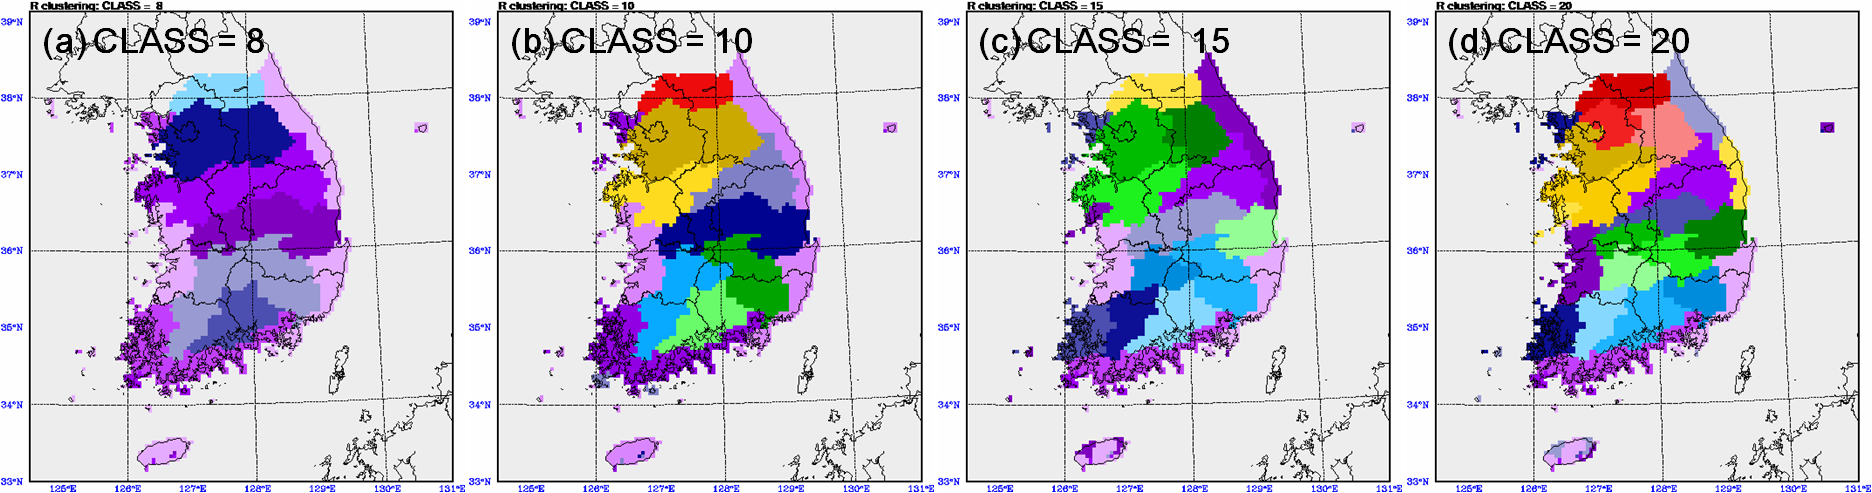 Fig. 2.2.3.7. Regional division of Korea through the cluster analysis of monthly accumulated precipitation